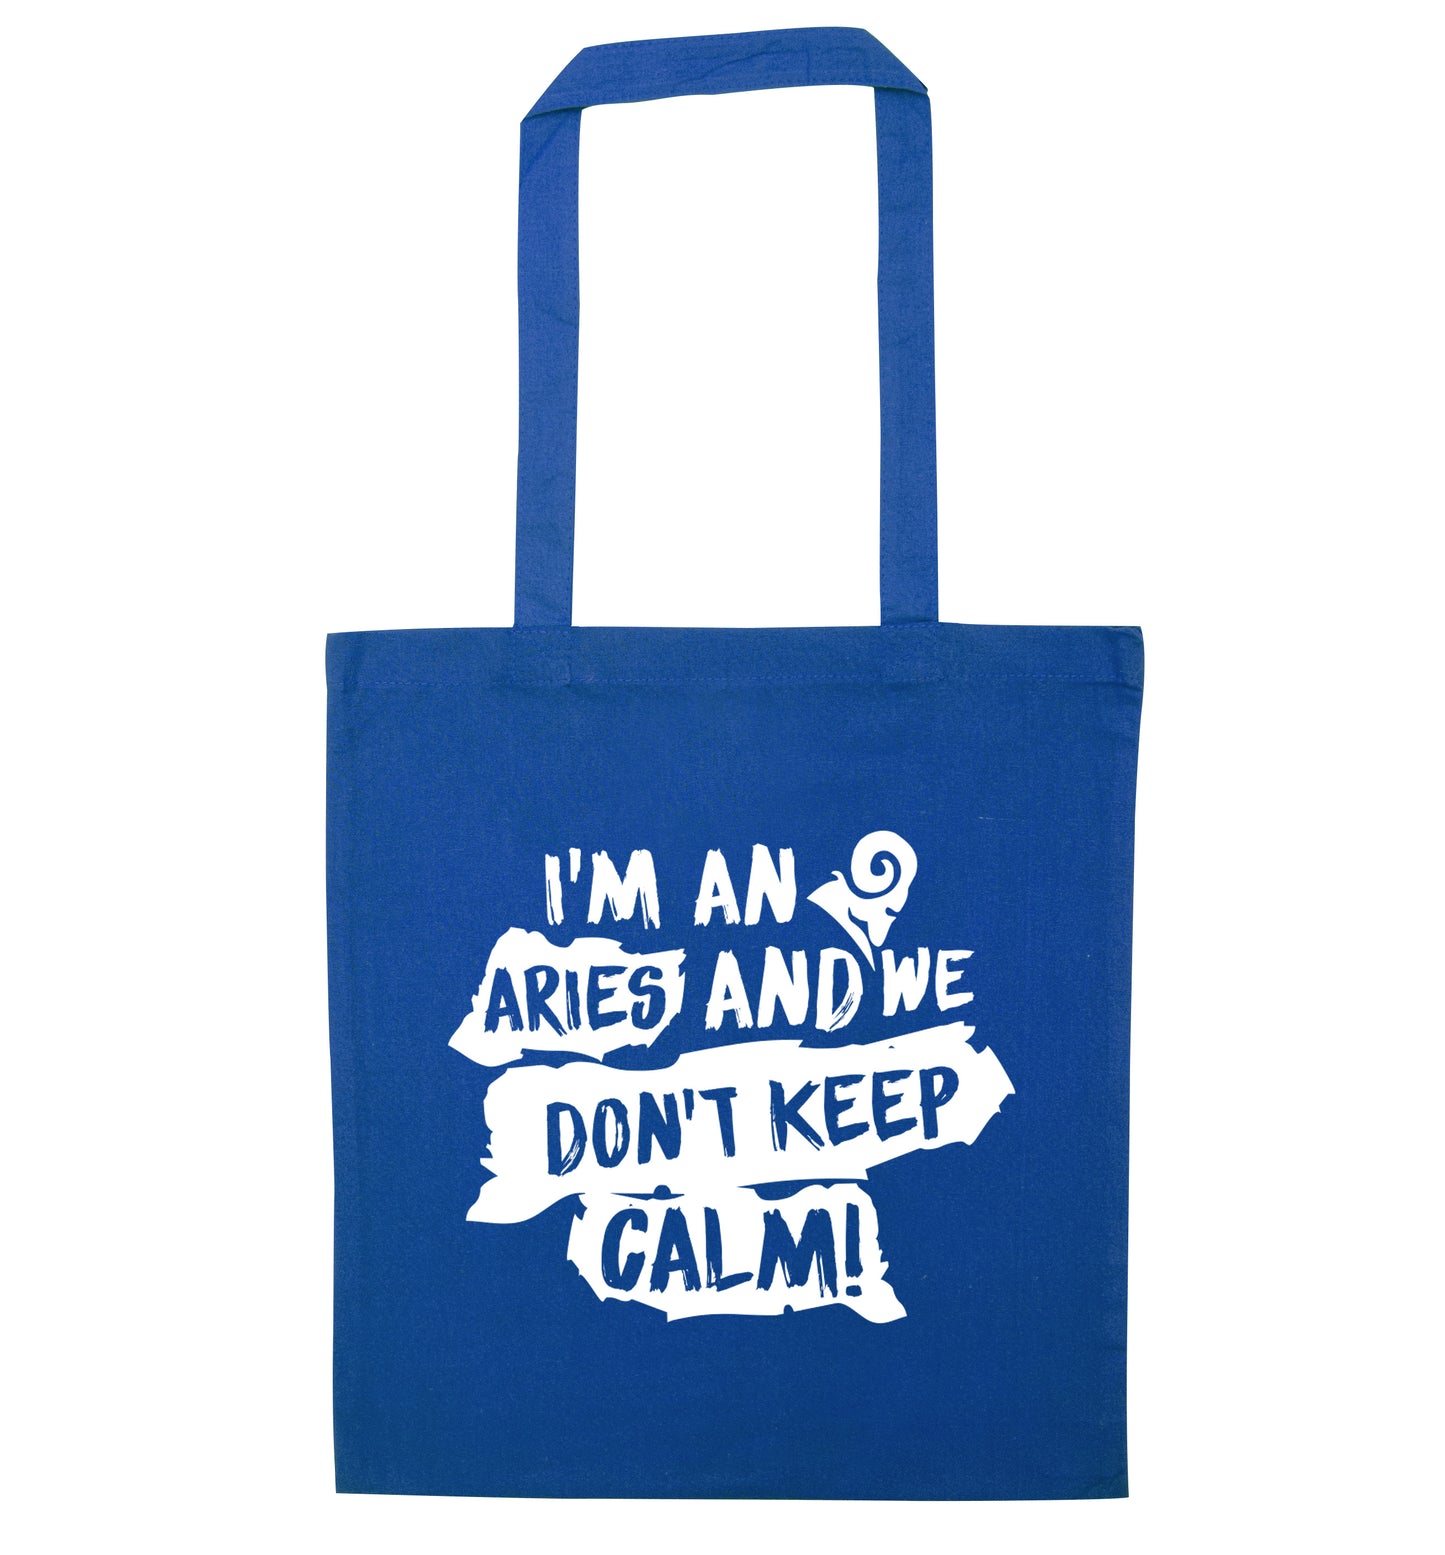 I'm an aries and we don't keep calm blue tote bag